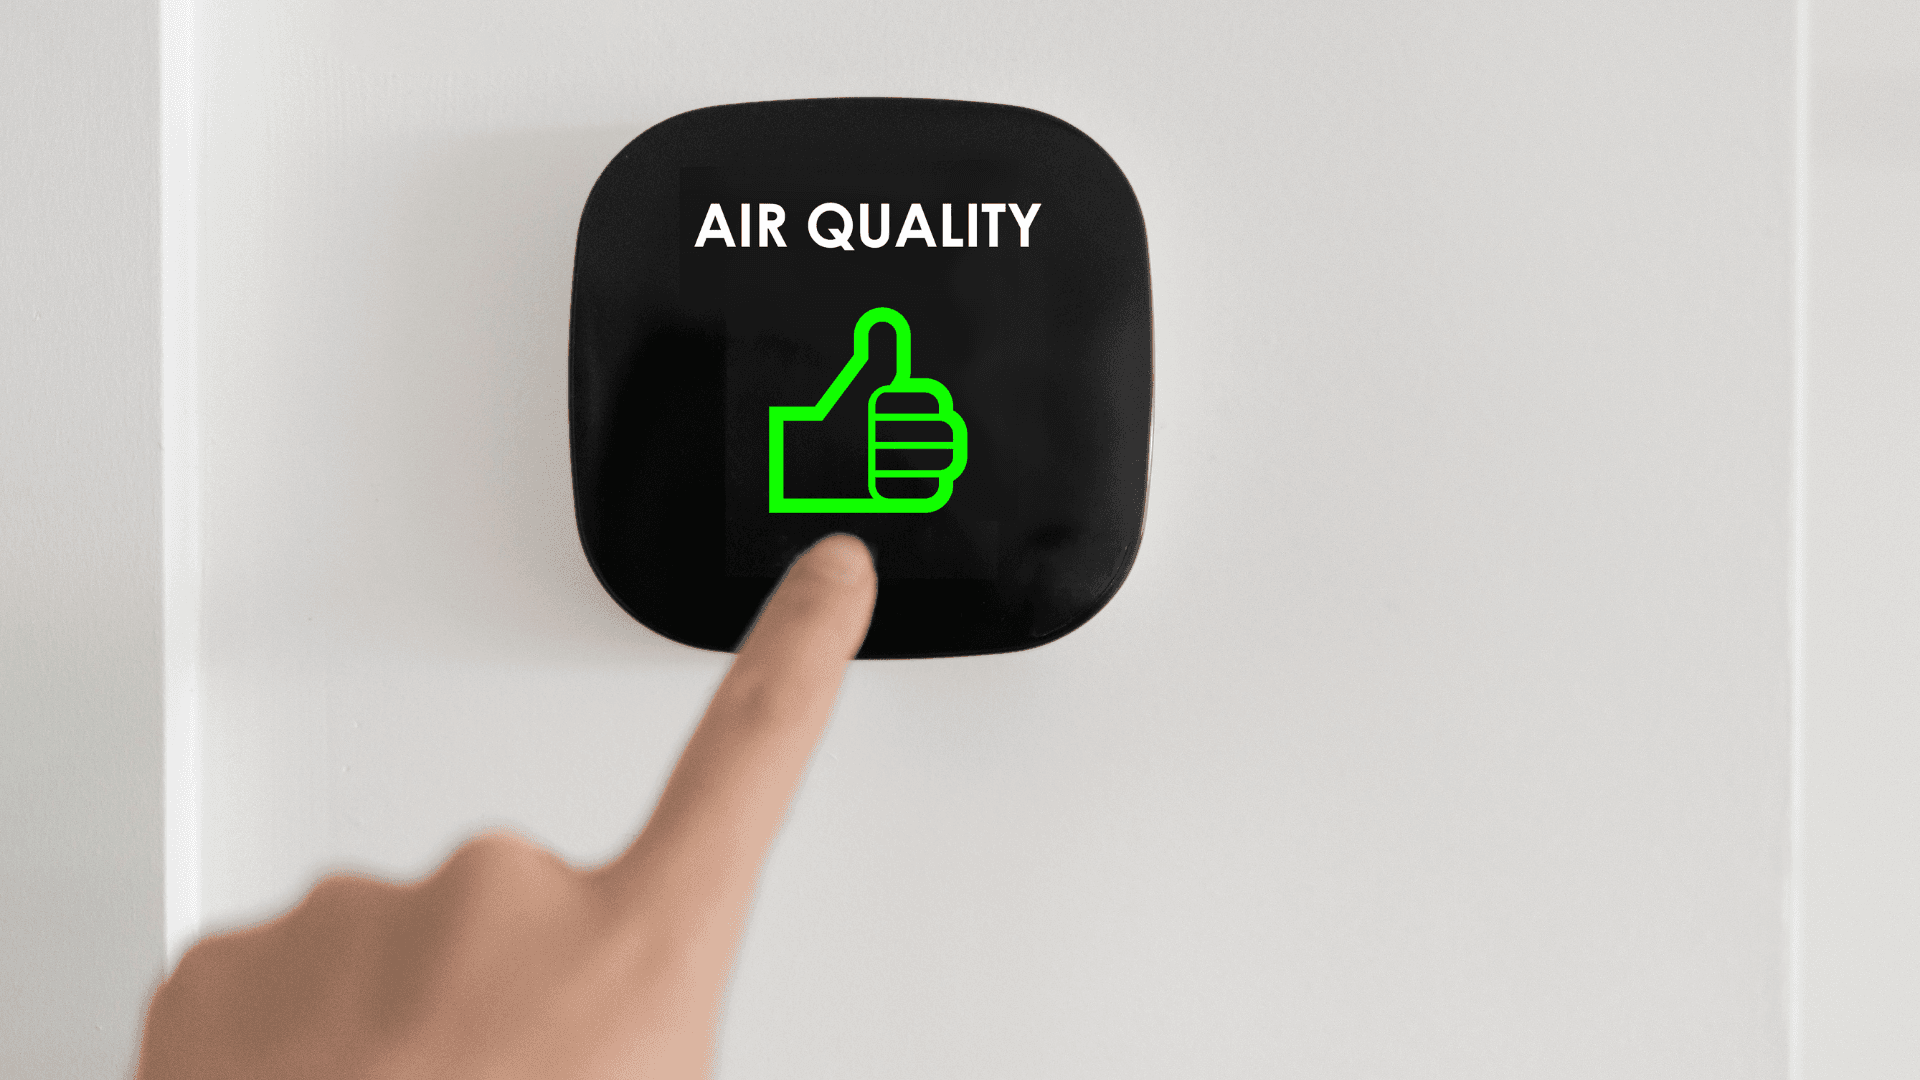 Product: Air Quality Monitoring